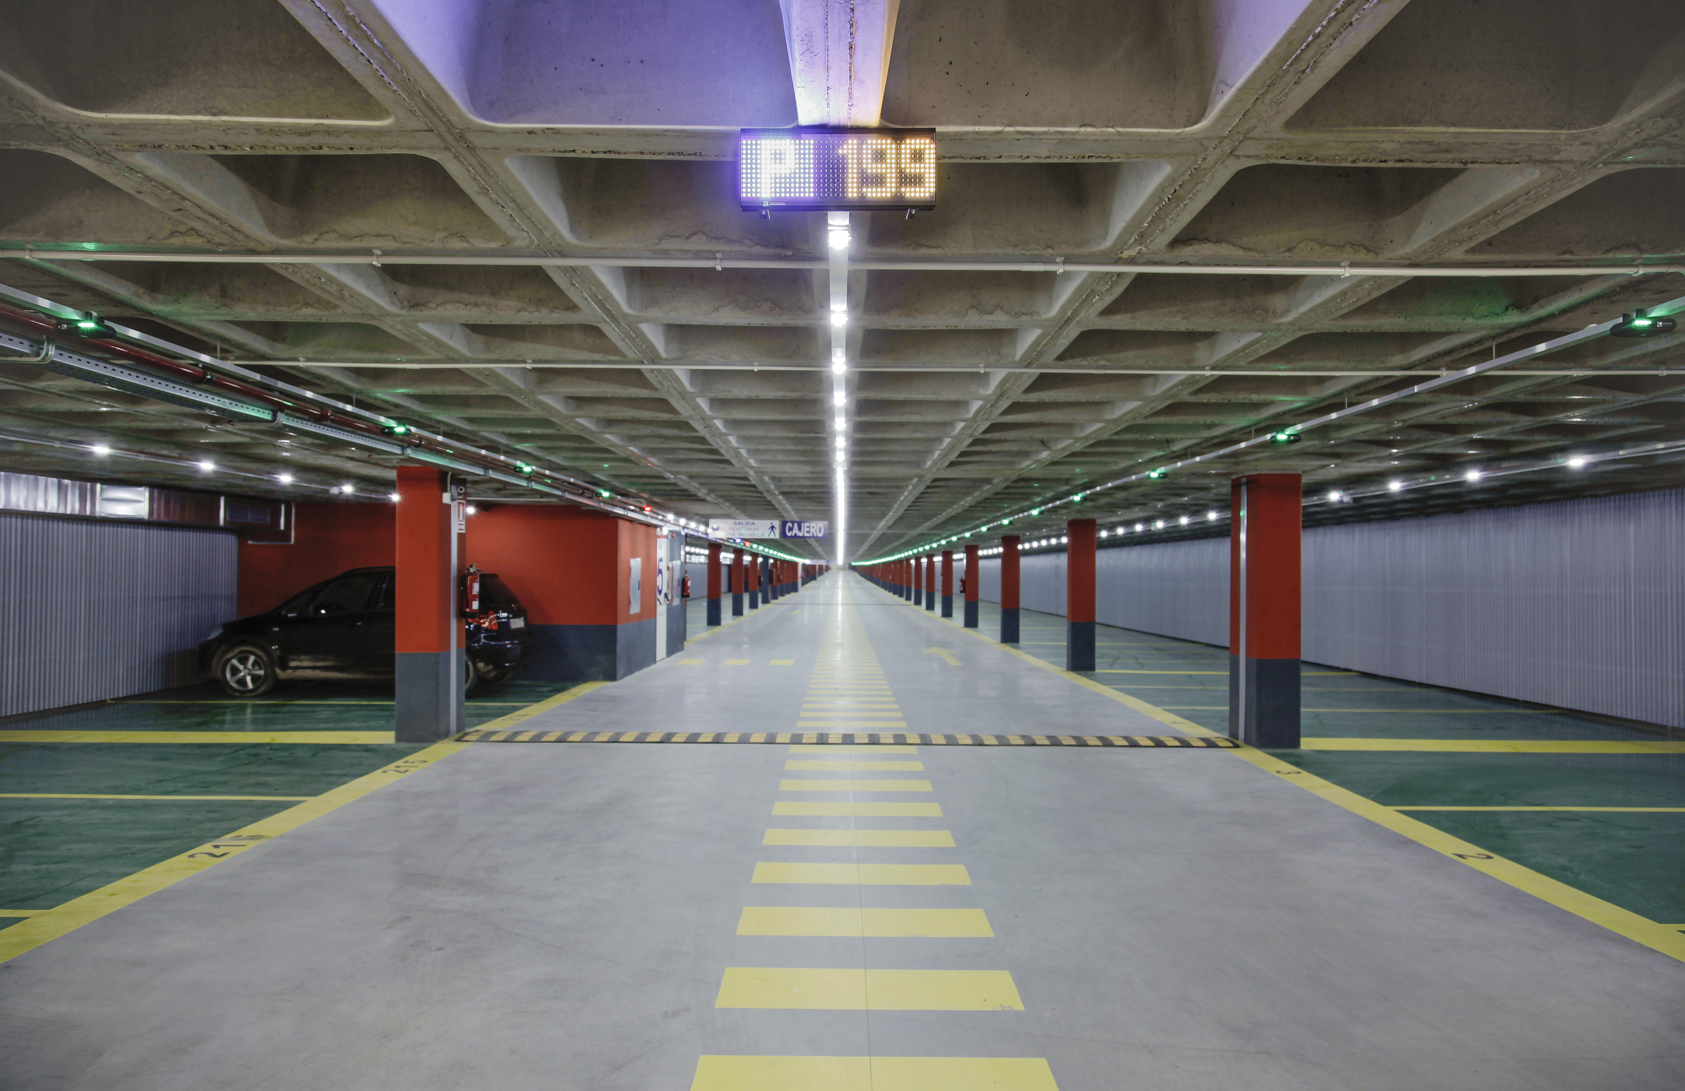 Circontrol presents its global efficient parking concept for shopping centers